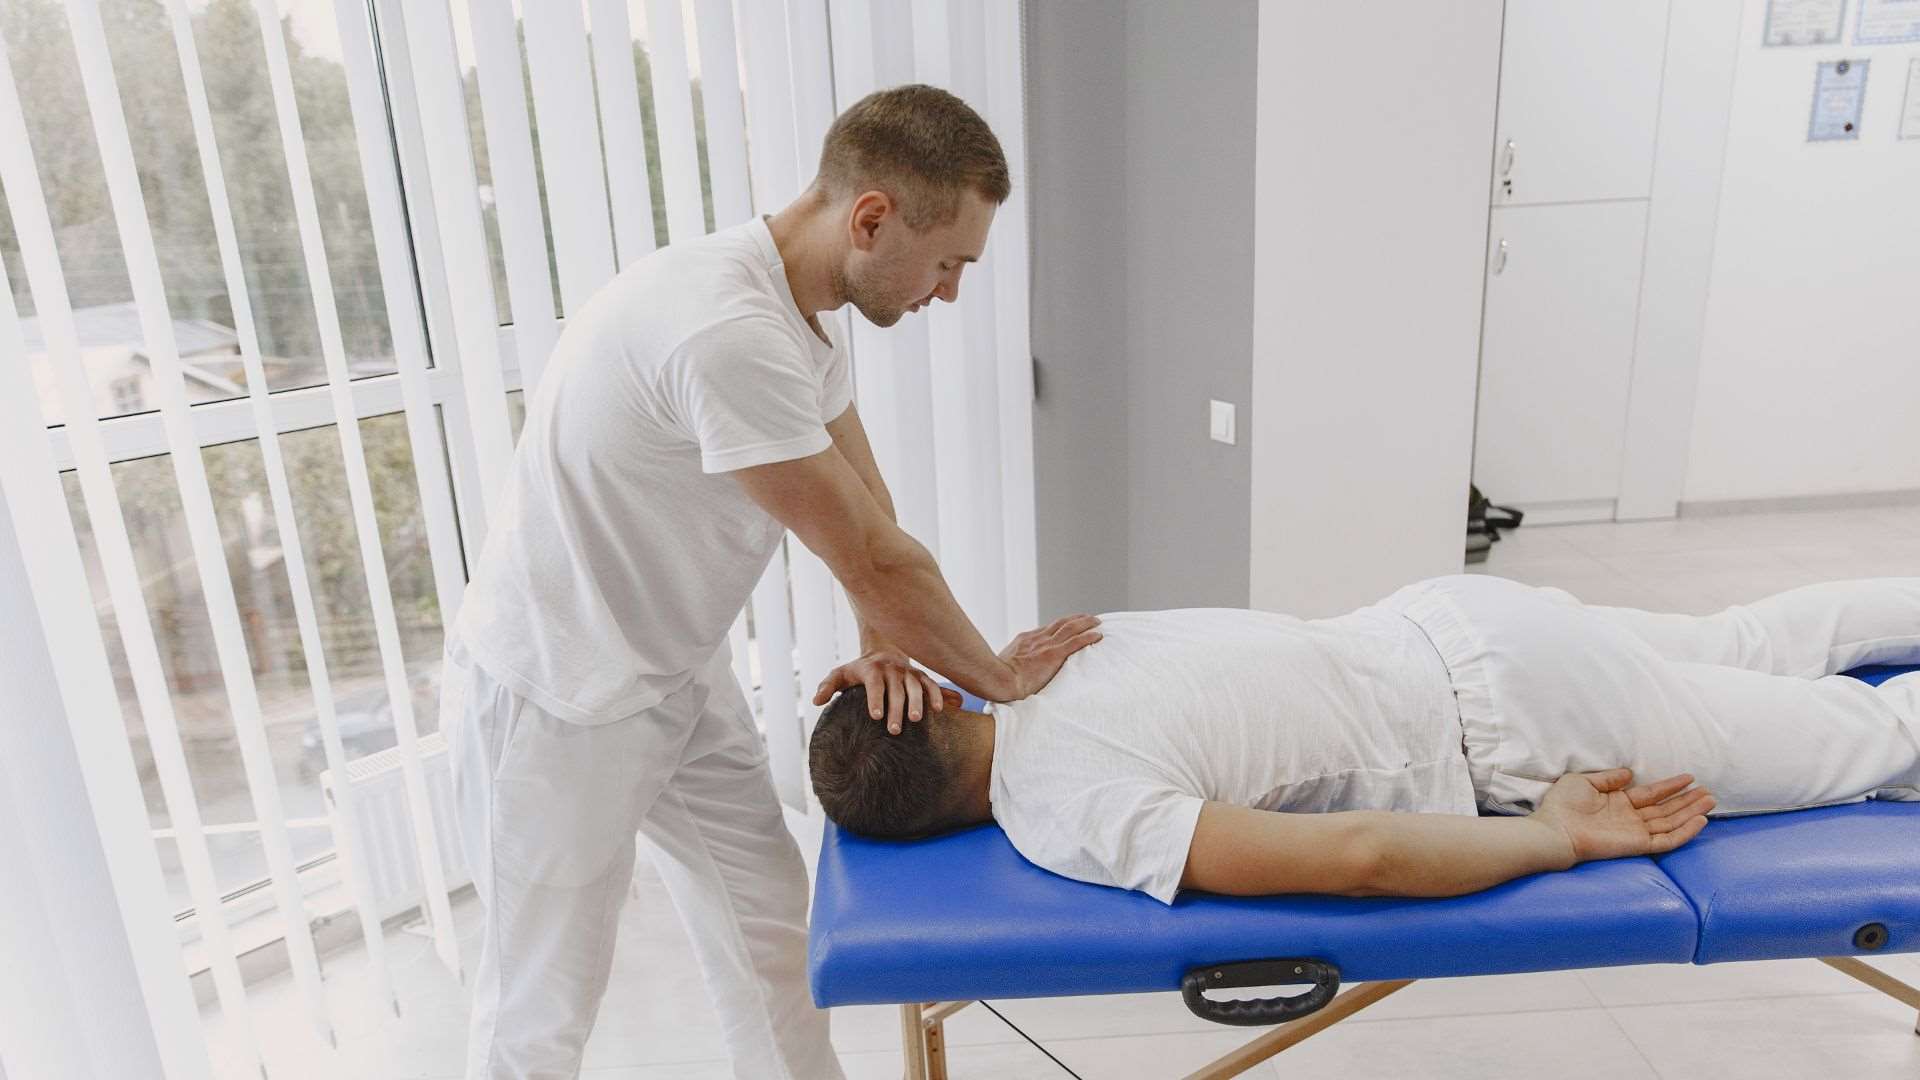 What Distinguishes a Chiropractor From a Physiotherapist?